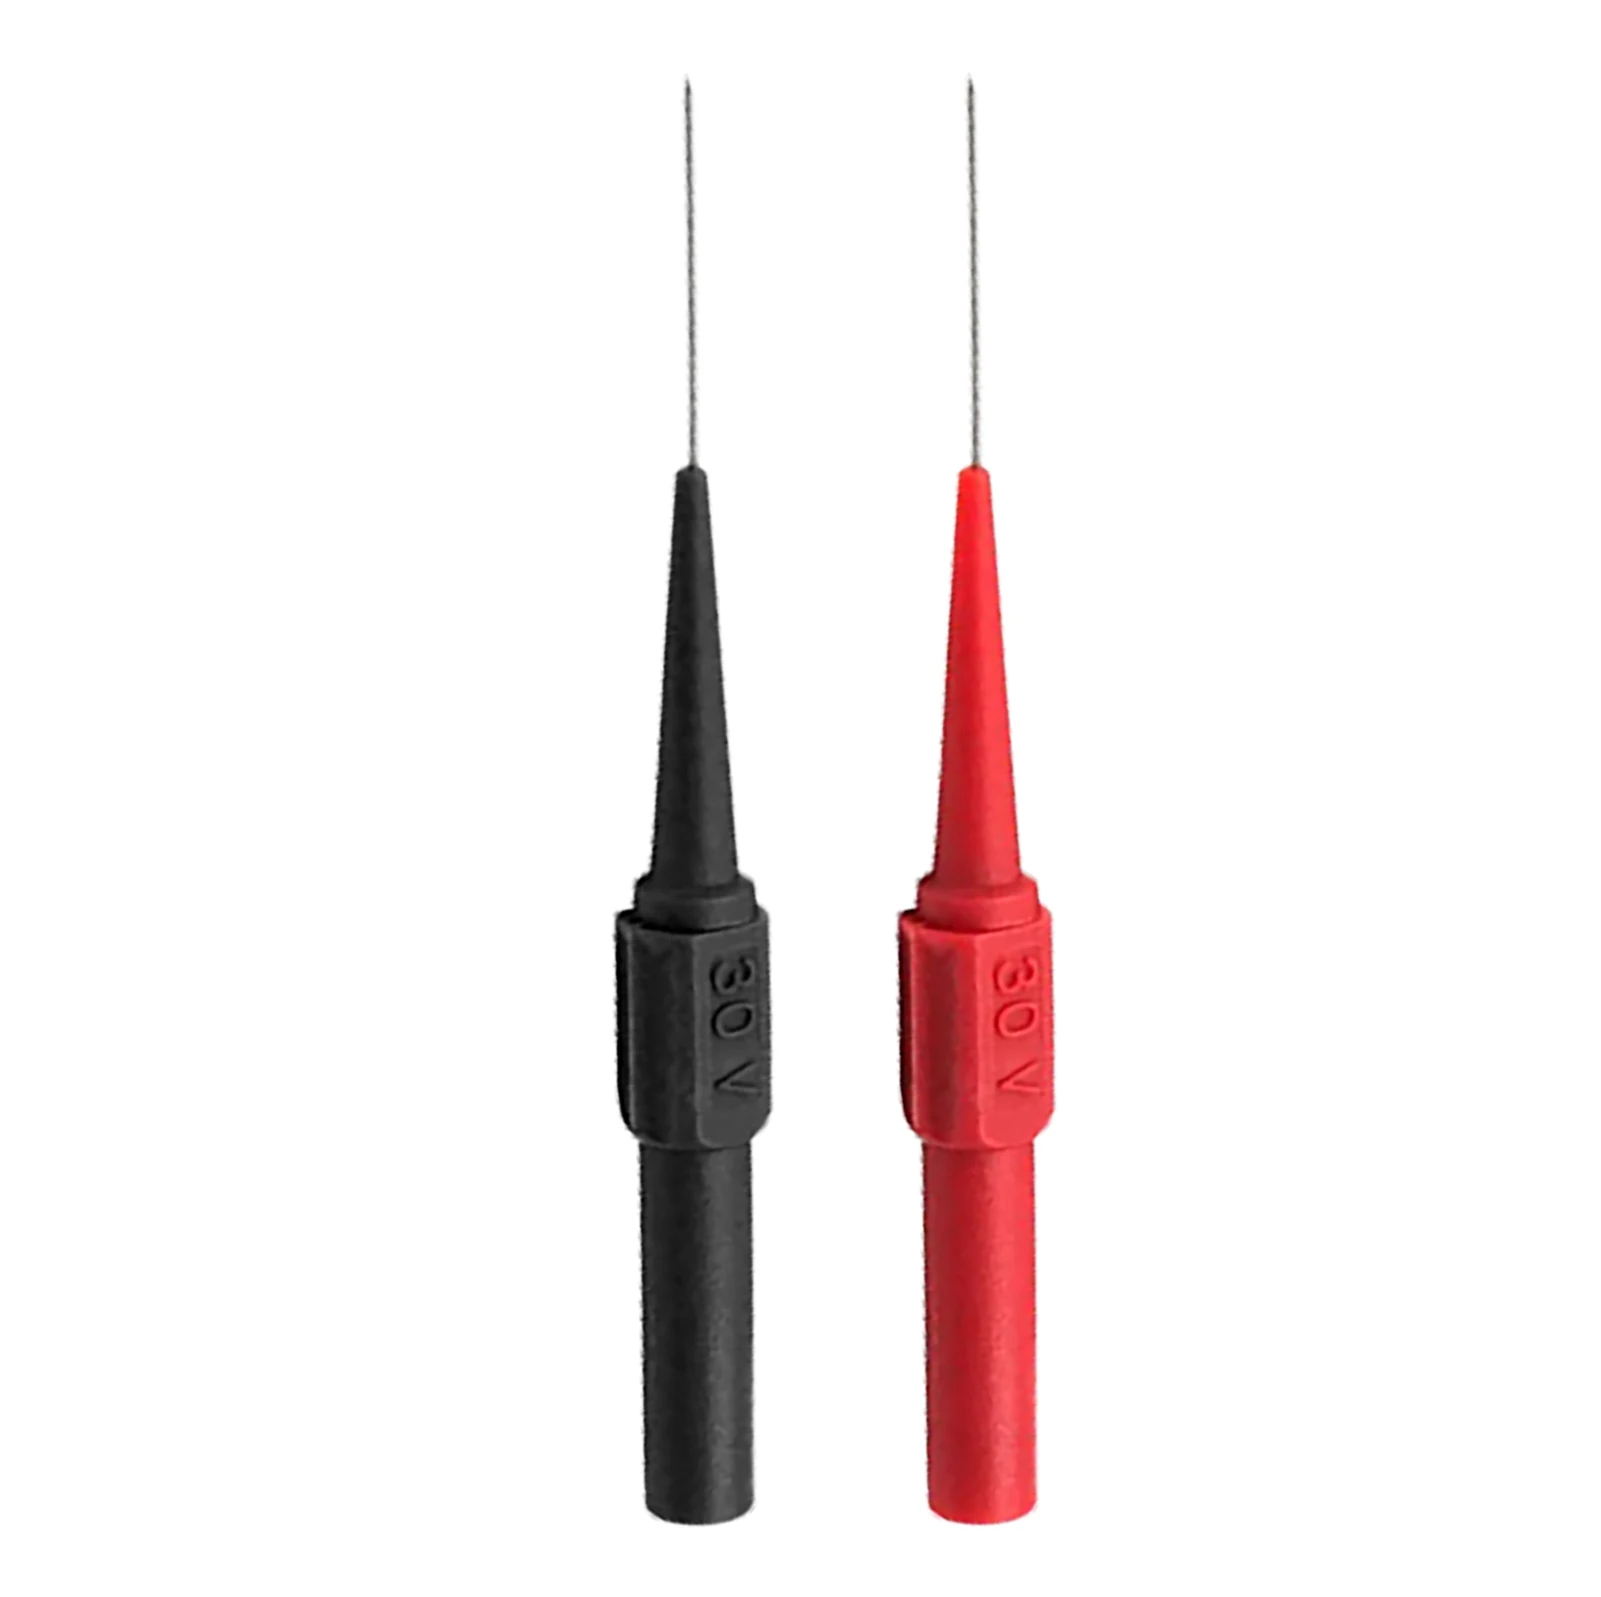 

Wire Piercing Probe 0.7mm Multimeter Test Probe High Temperature Resistance Detection Wire Piercing Probe for Car Repair